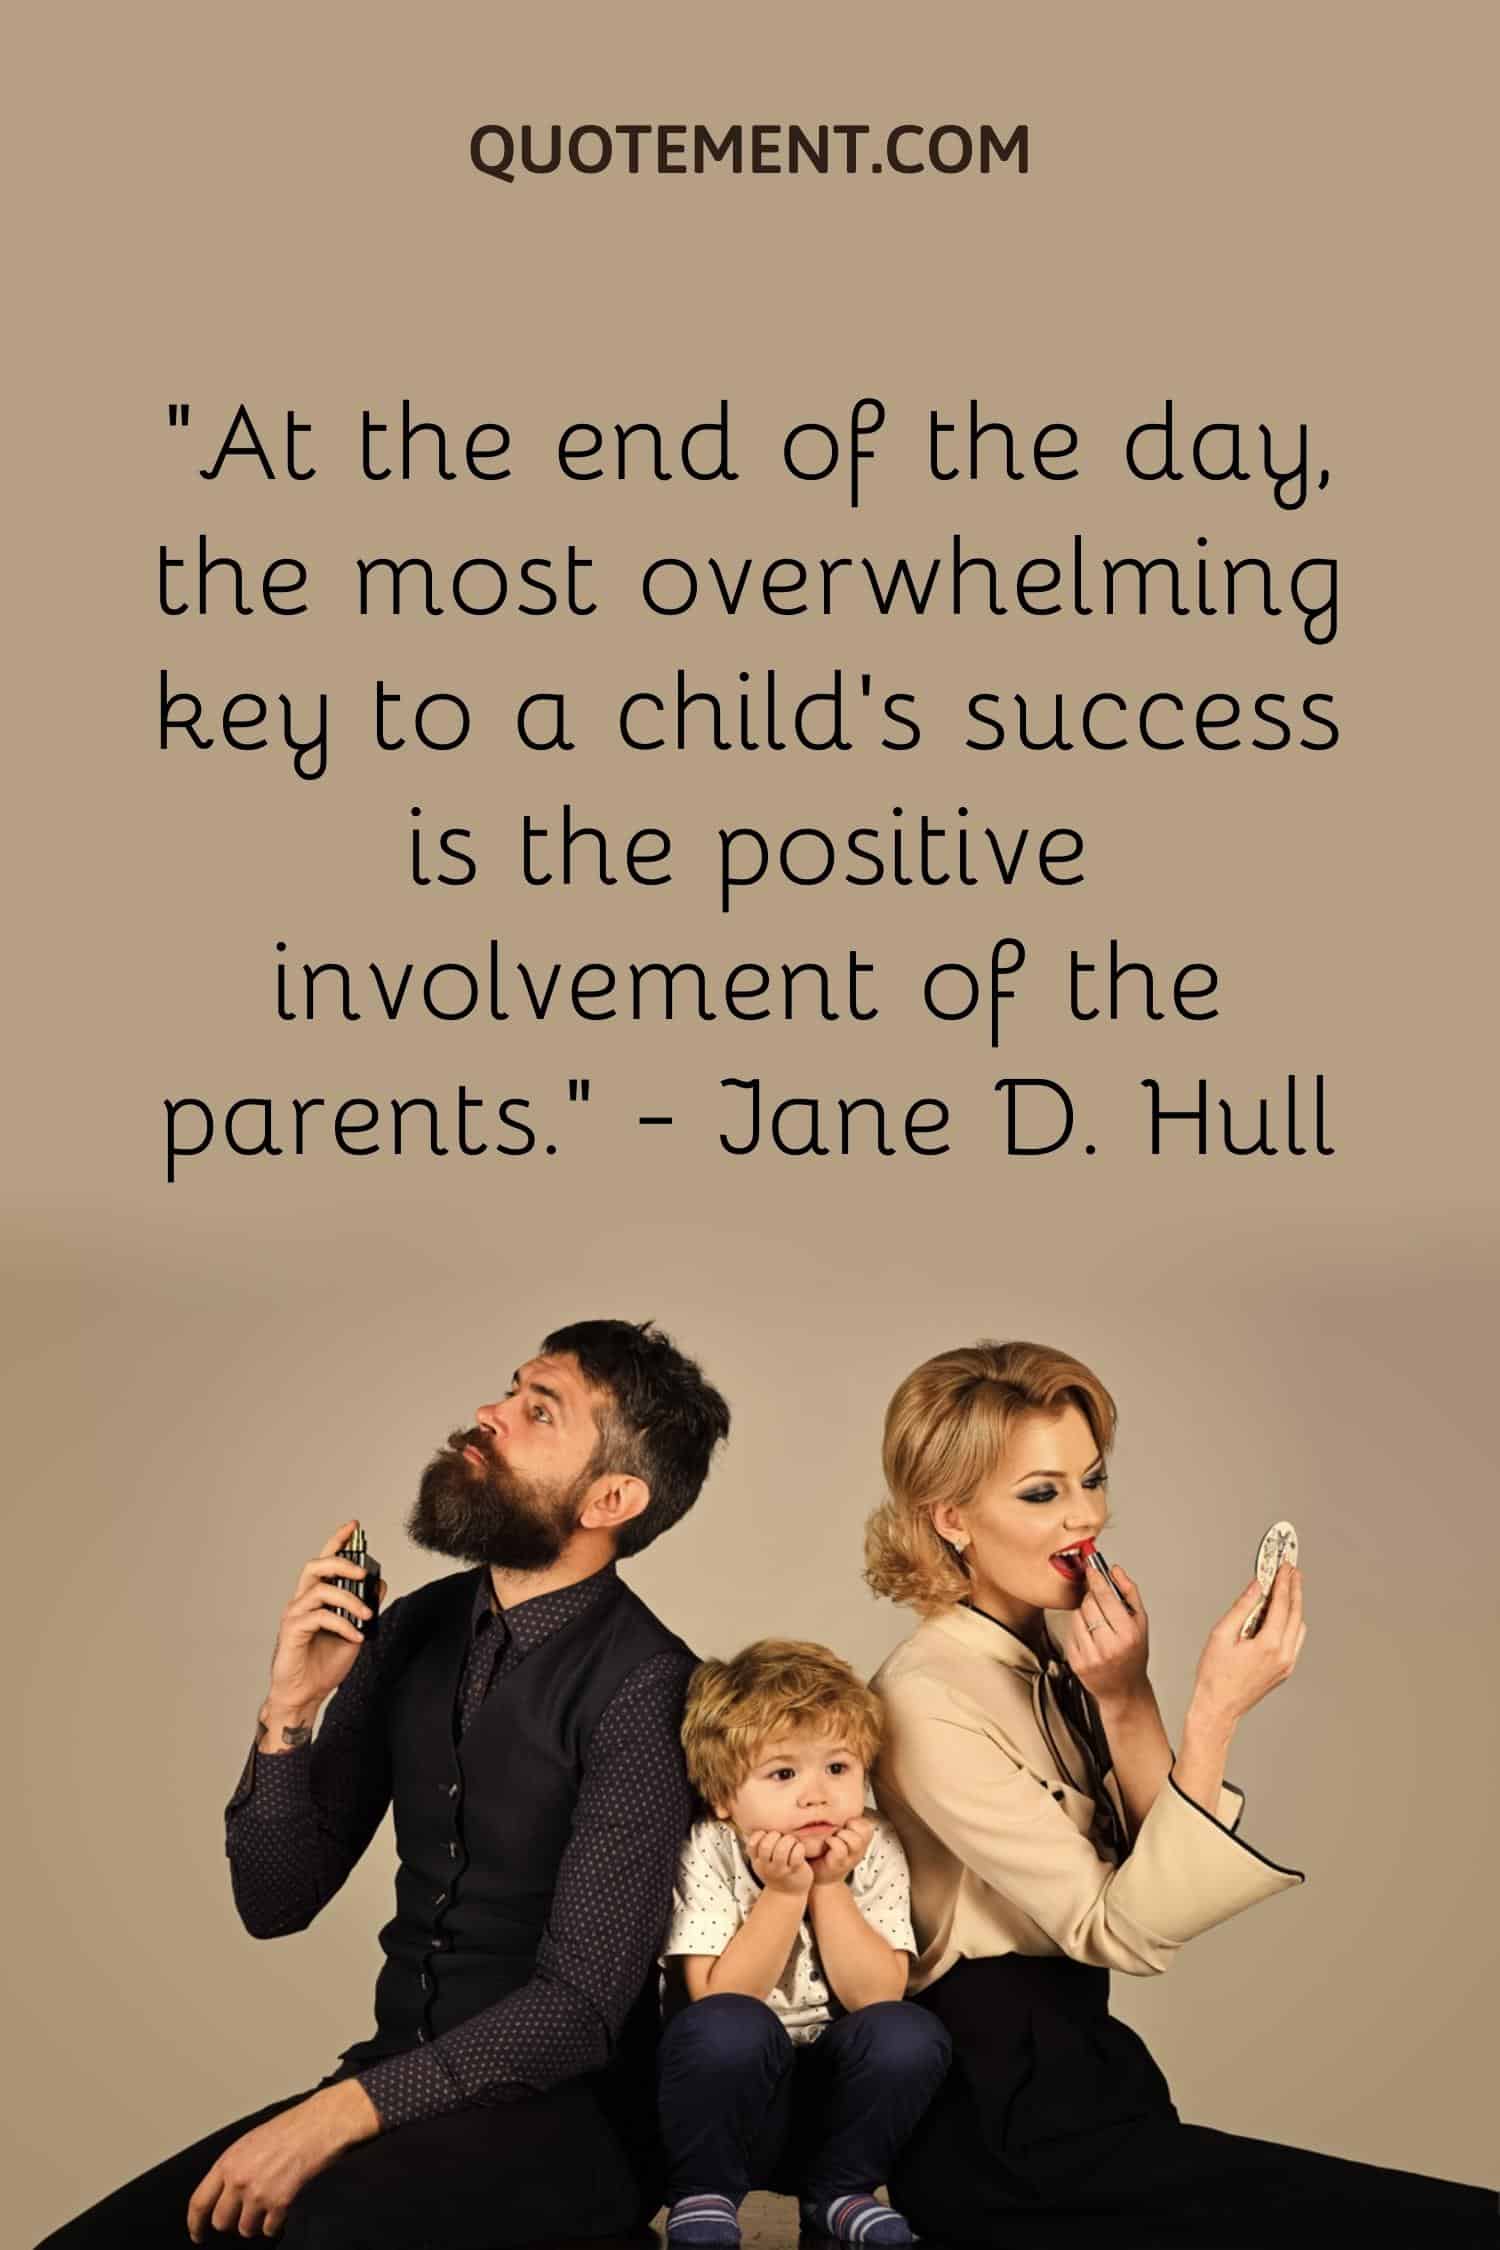 key to a child’s success is the positive involvement of the paren